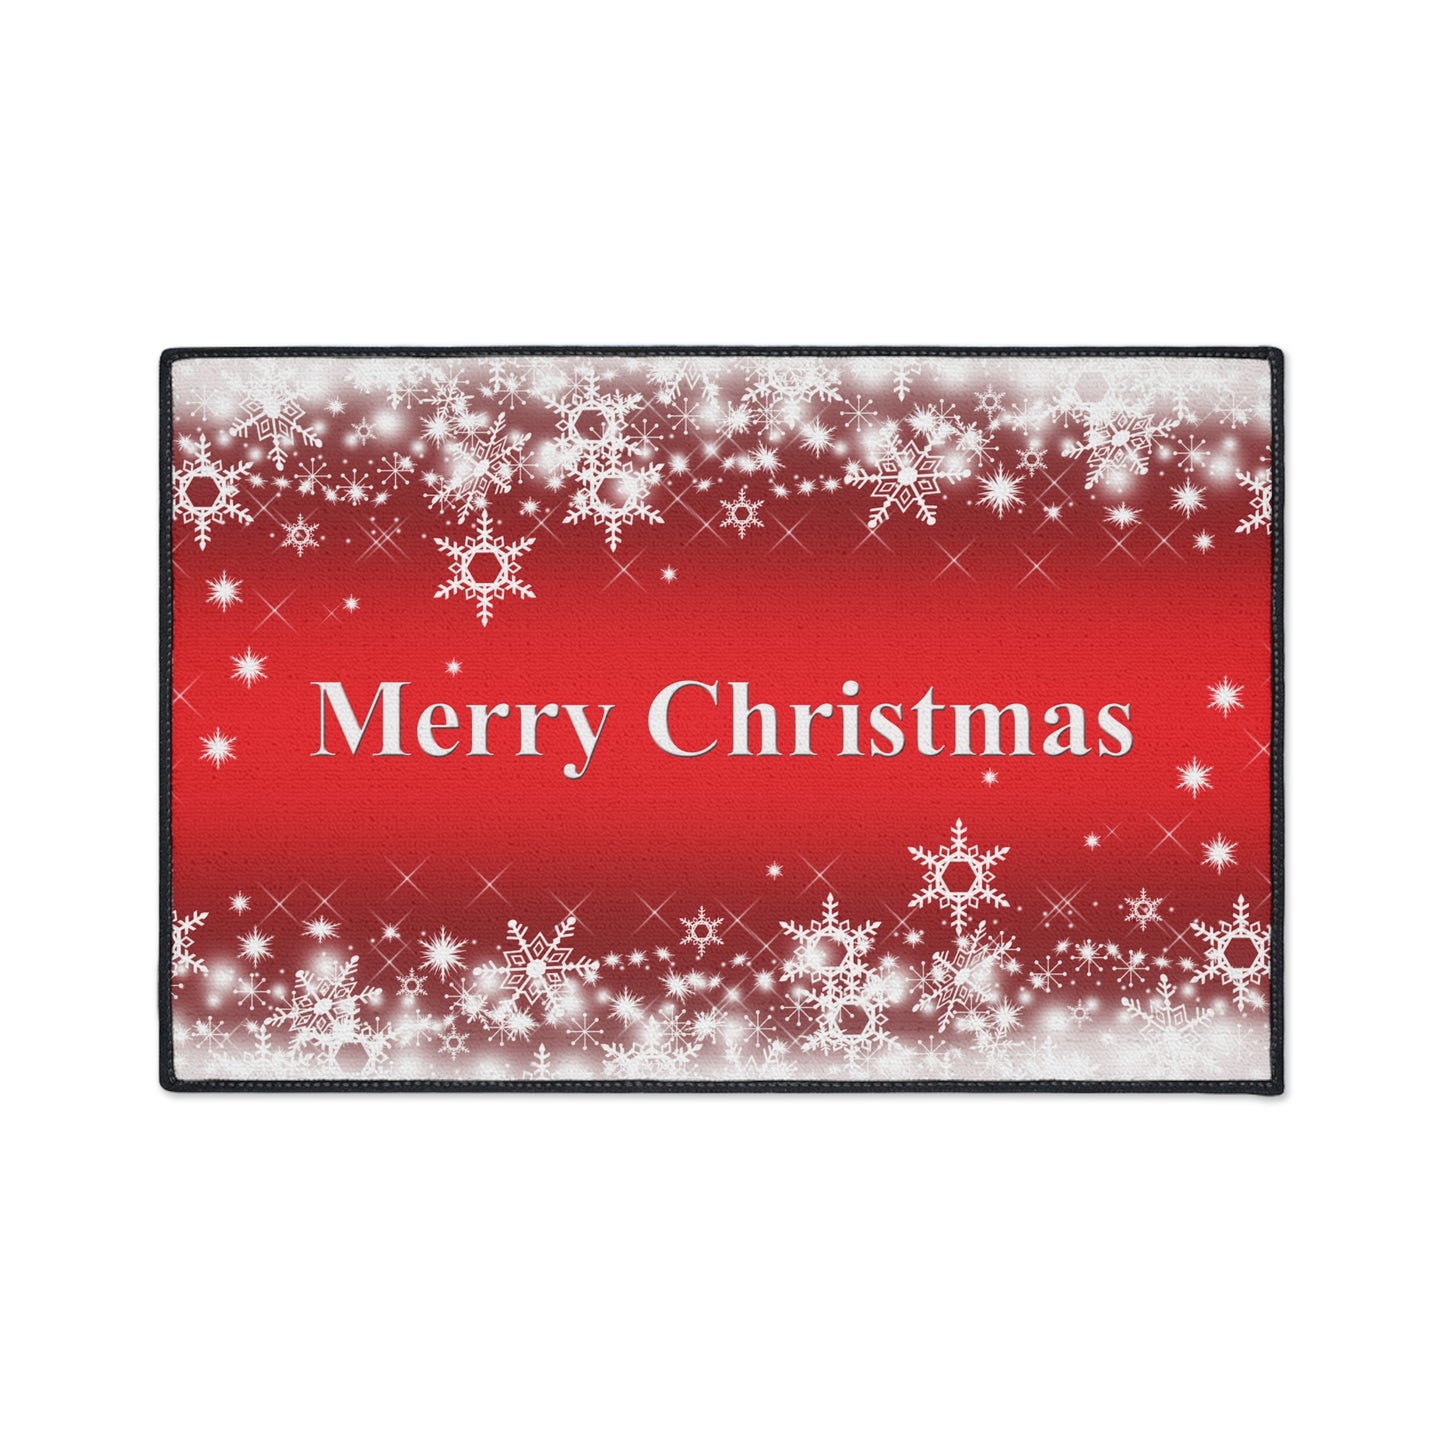 "Merry Christmas" Heavy Duty Floor Mat with Non-Slip Backing